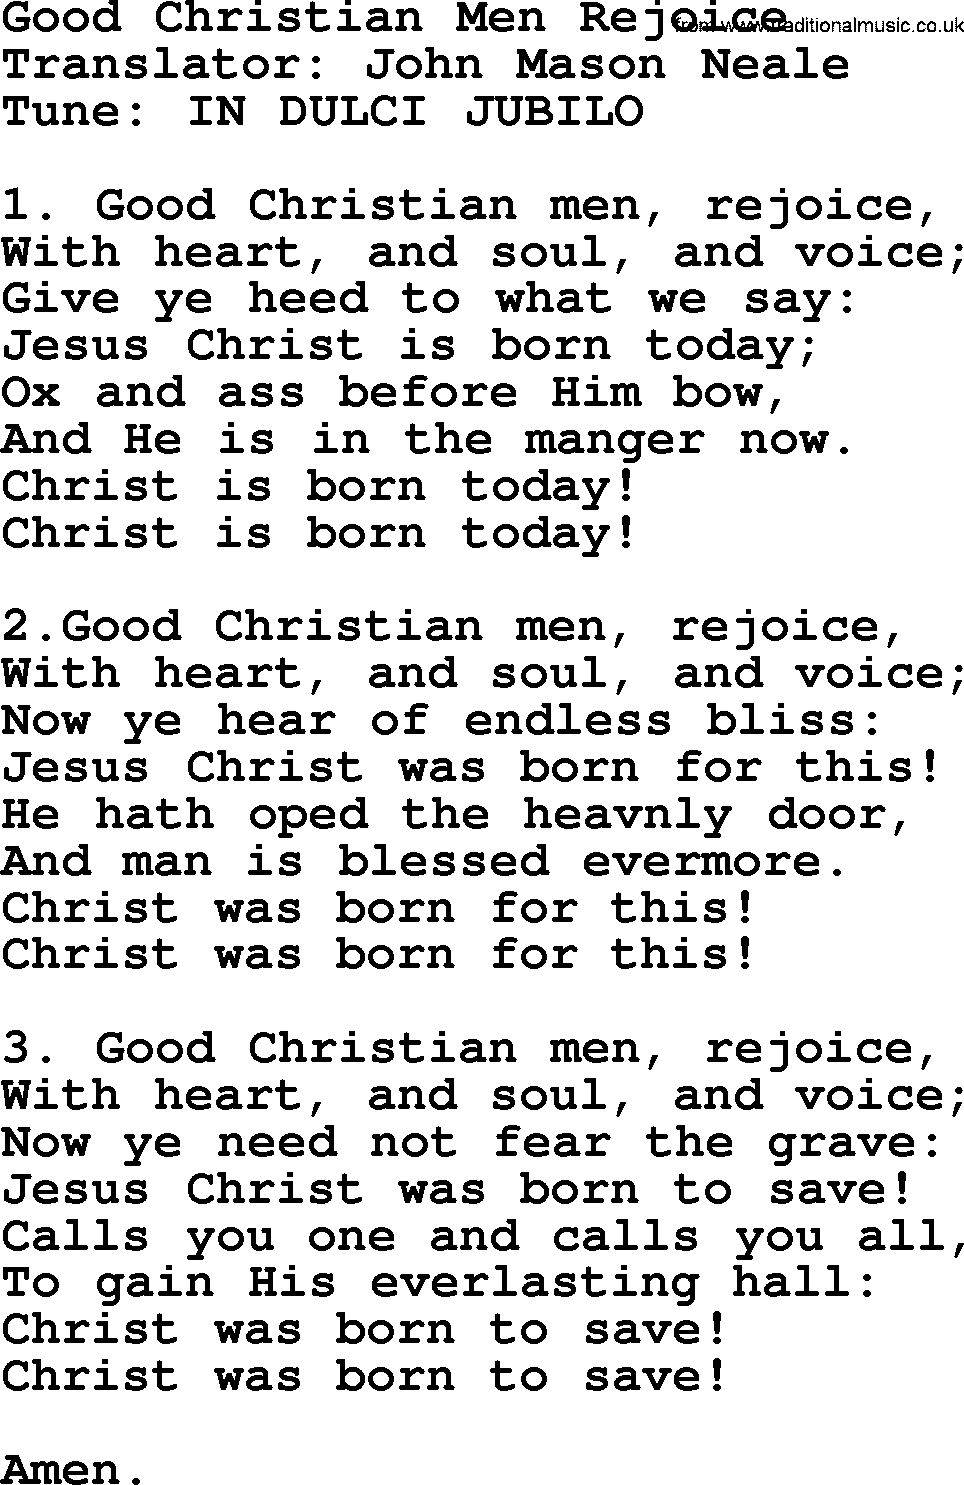 A collection of 500+ most sung Christian church hymns and songs, title: Good Christian Men Rejoice, lyrics, PPTX and PDF